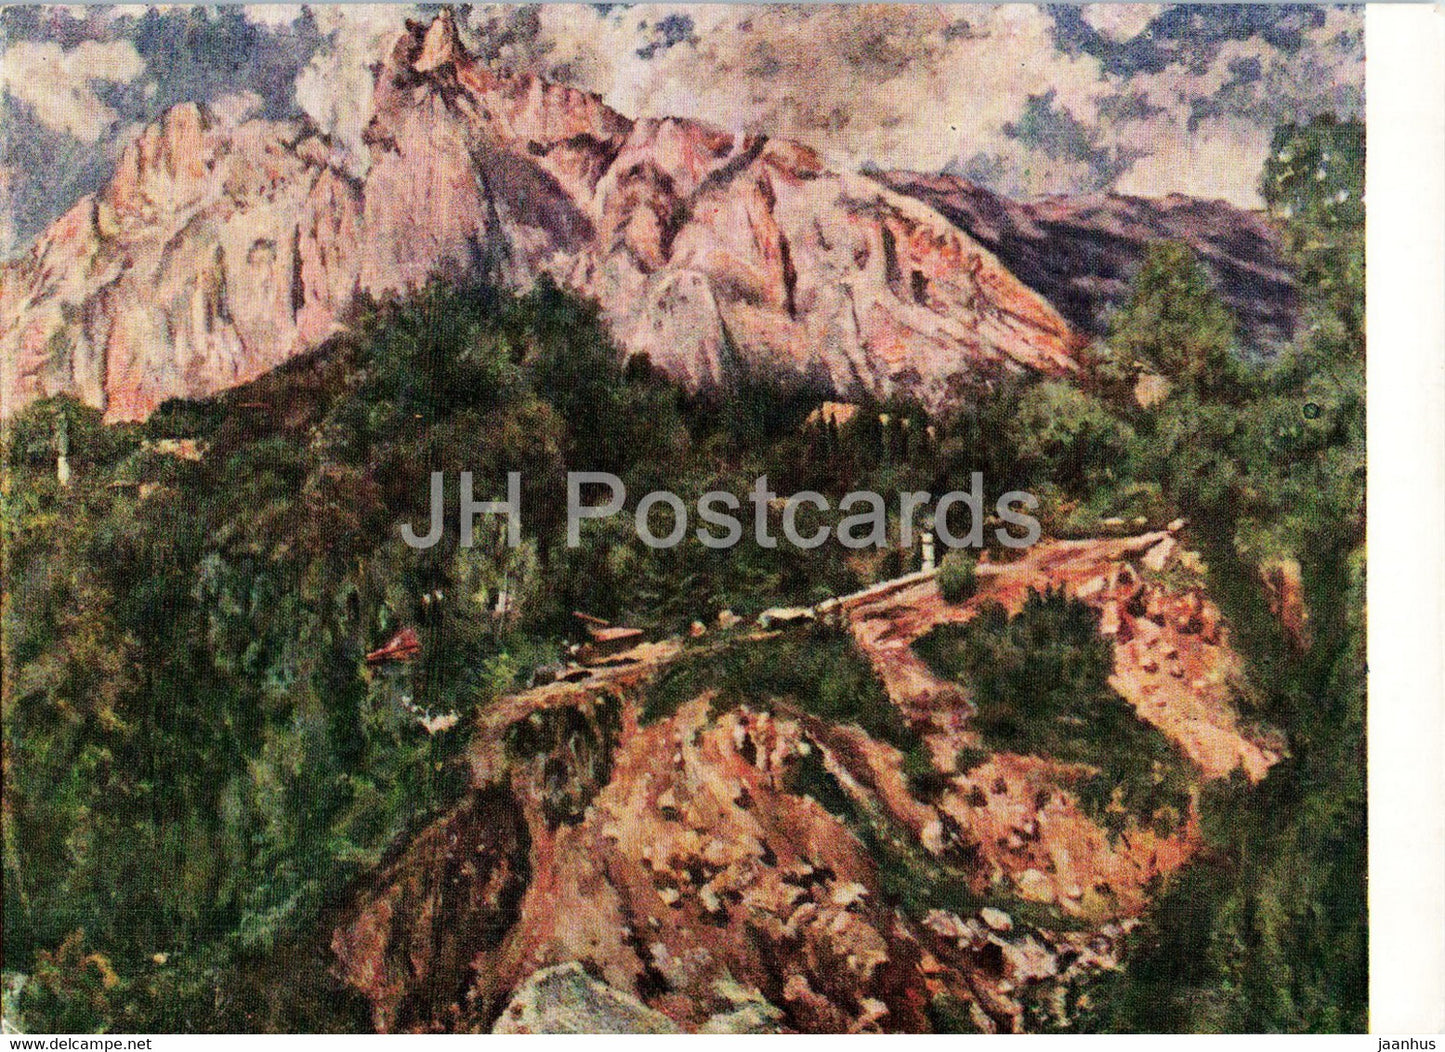 painting by A. Lentulov - Ay Petri mountain - Crimea - Russian art - 1961 - Russia USSR - unused - JH Postcards